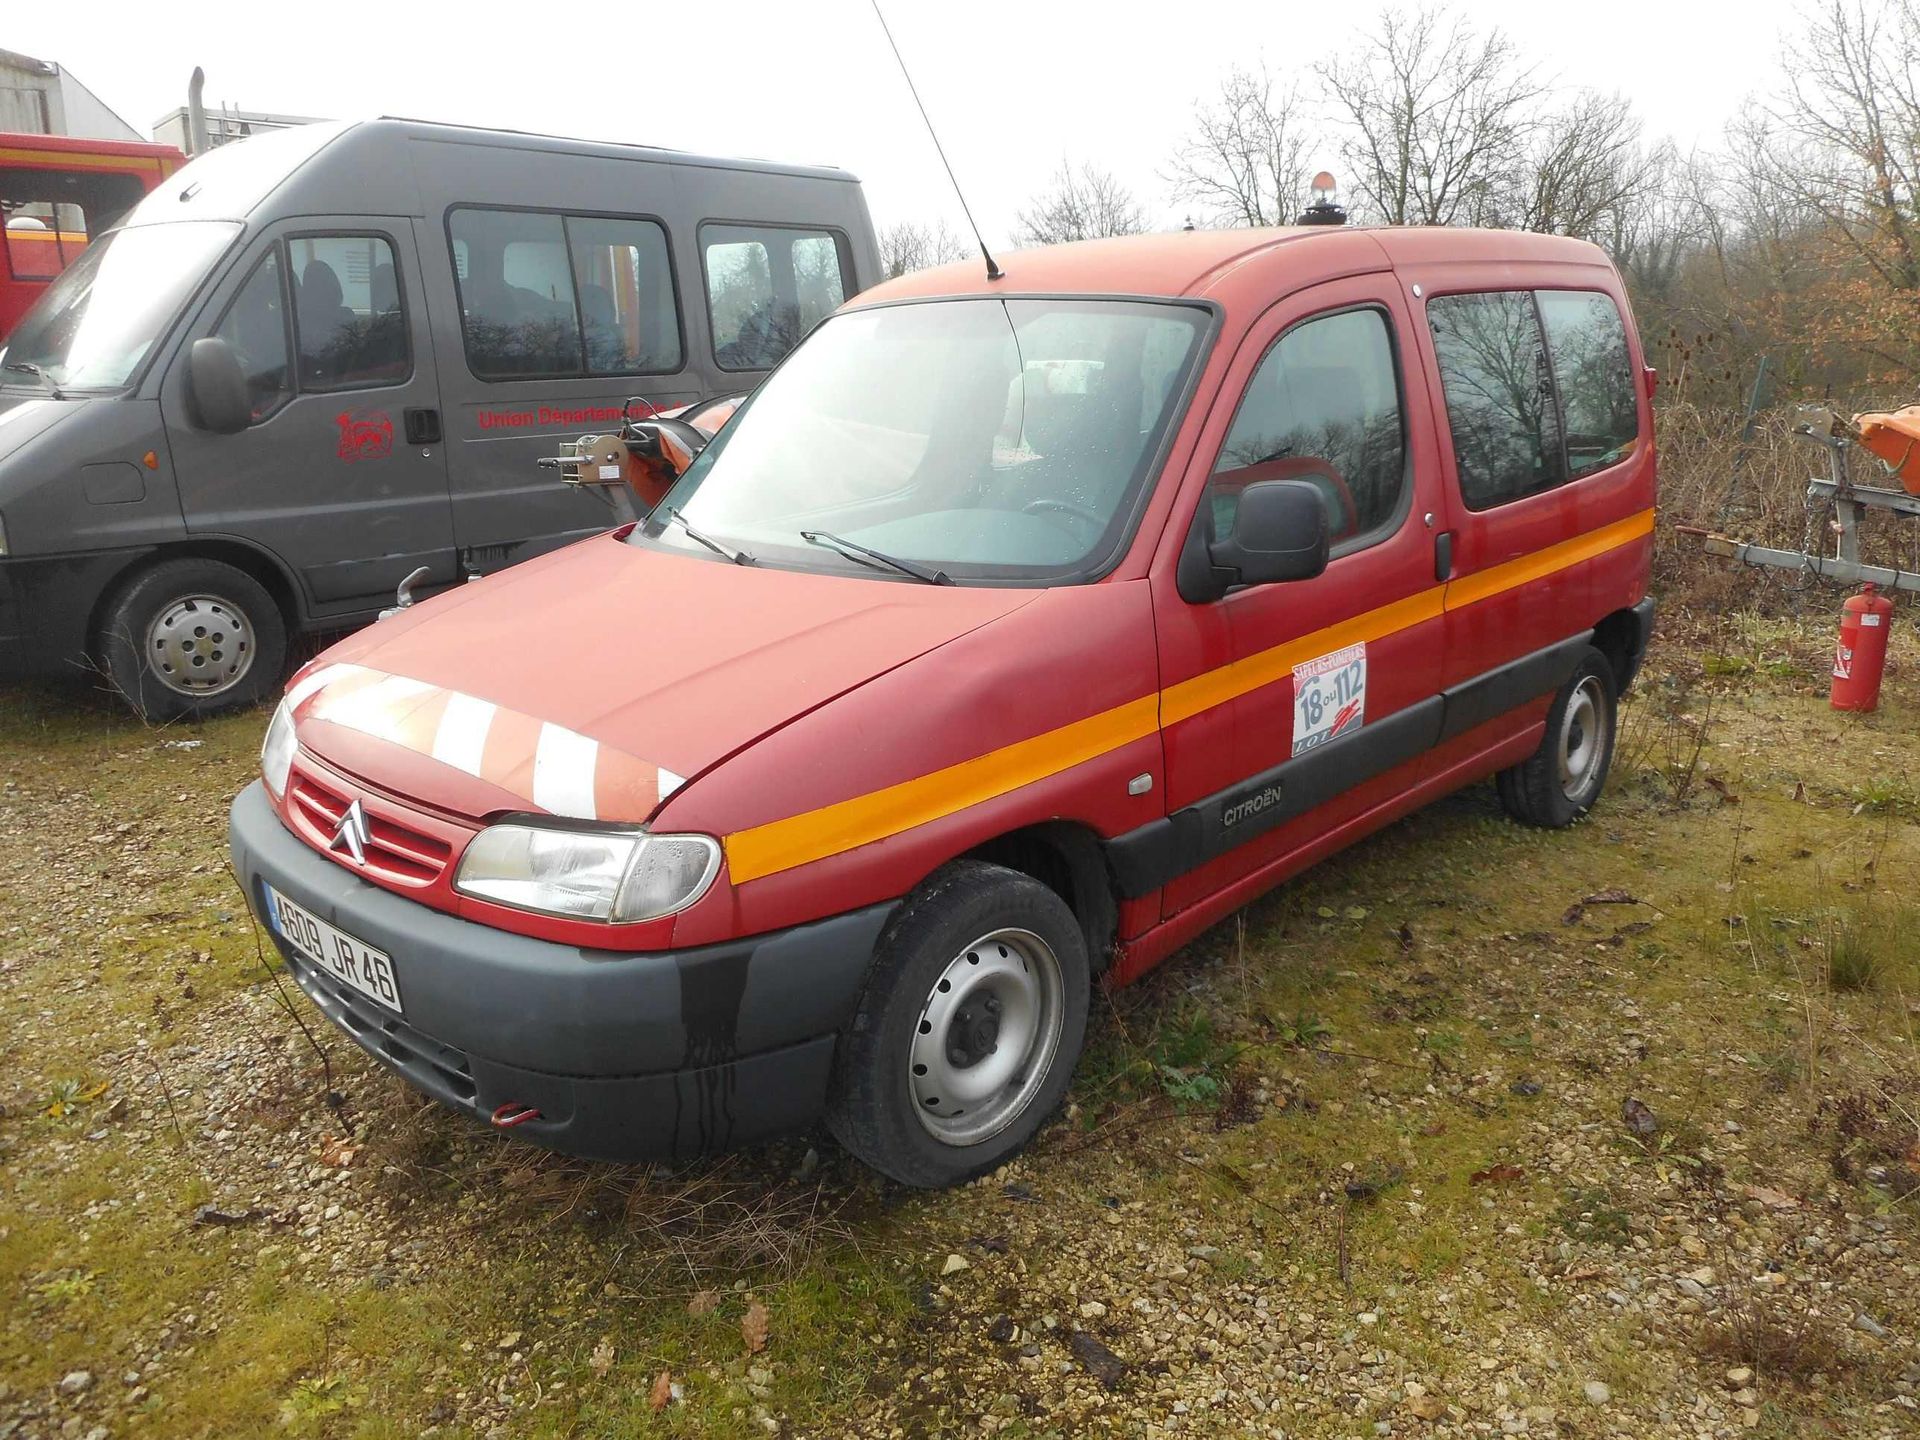 Null [RP] Lot reserved for car professionals.
CITROEN Berlingo 1.4 i 75hp , Petr&hellip;